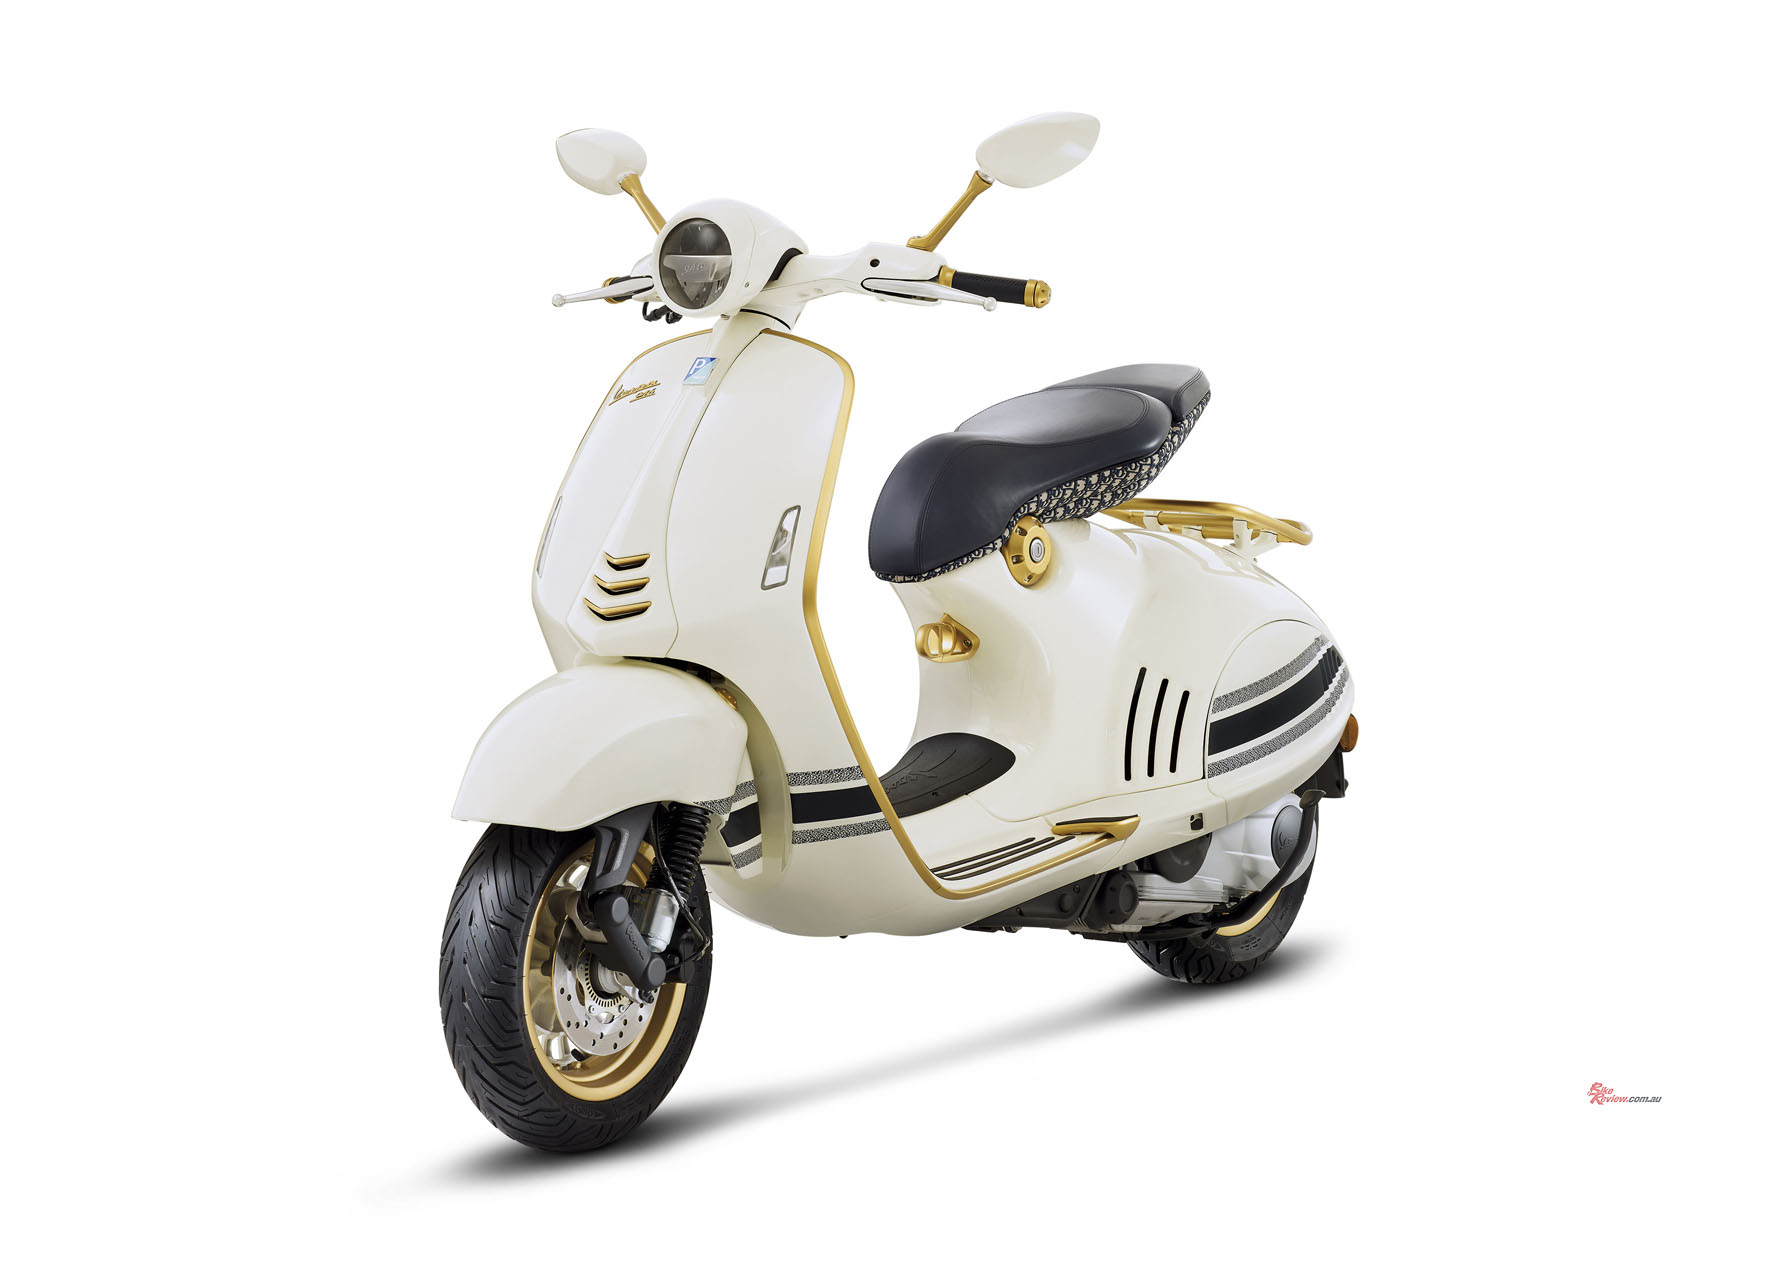 With the Vespa 946 Christian Dior, you'll turn heads and make a lasting  impression wherever you go. So why settle for ordinary when you can…